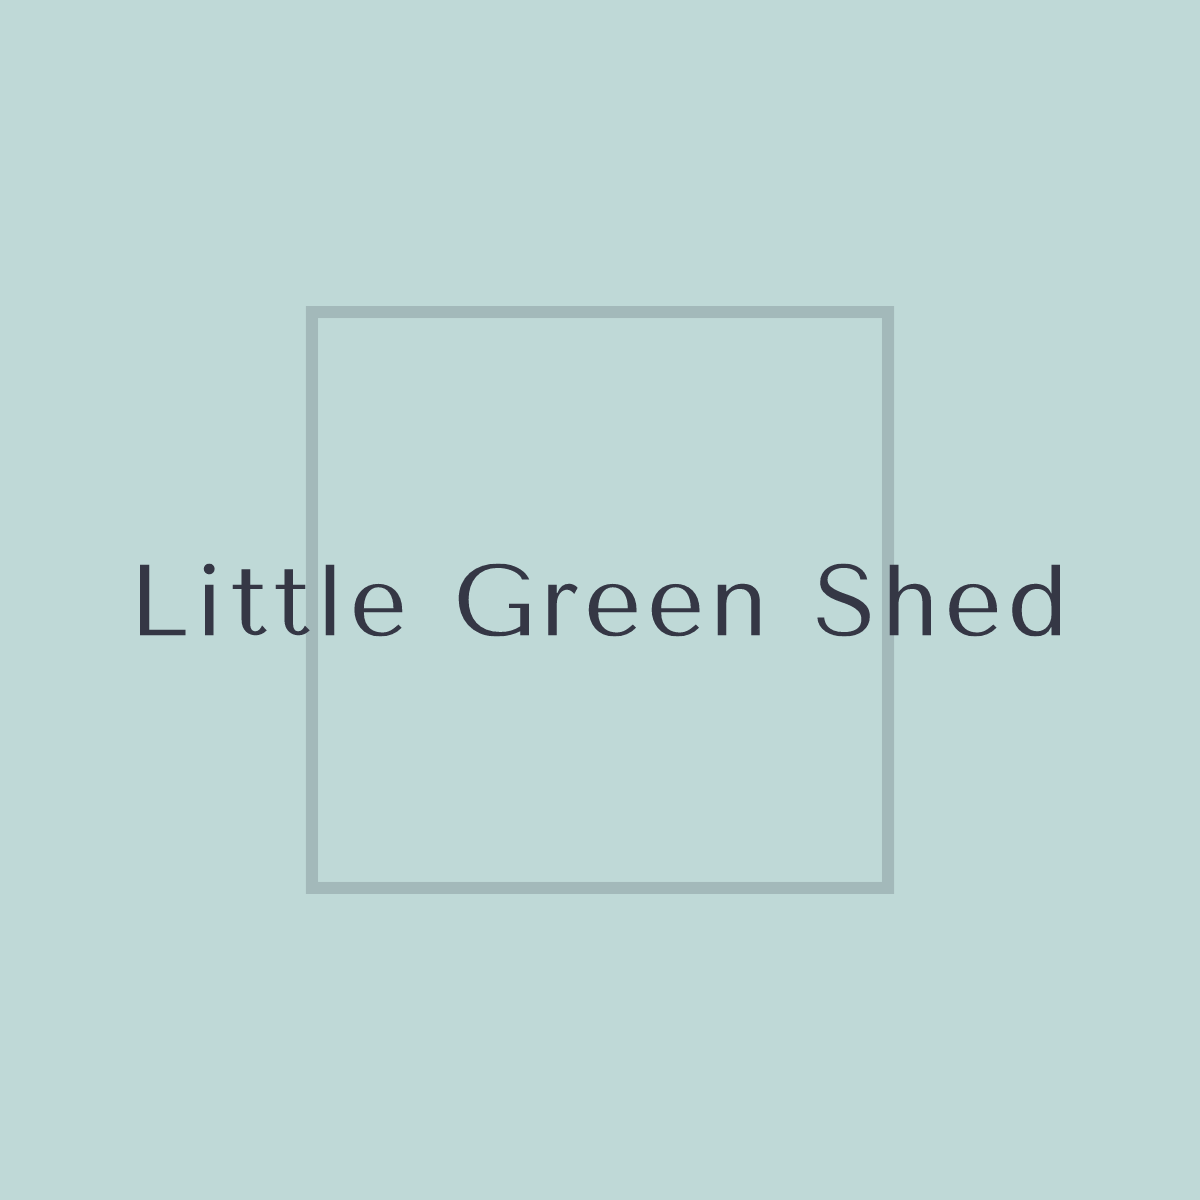 Little Green Shed